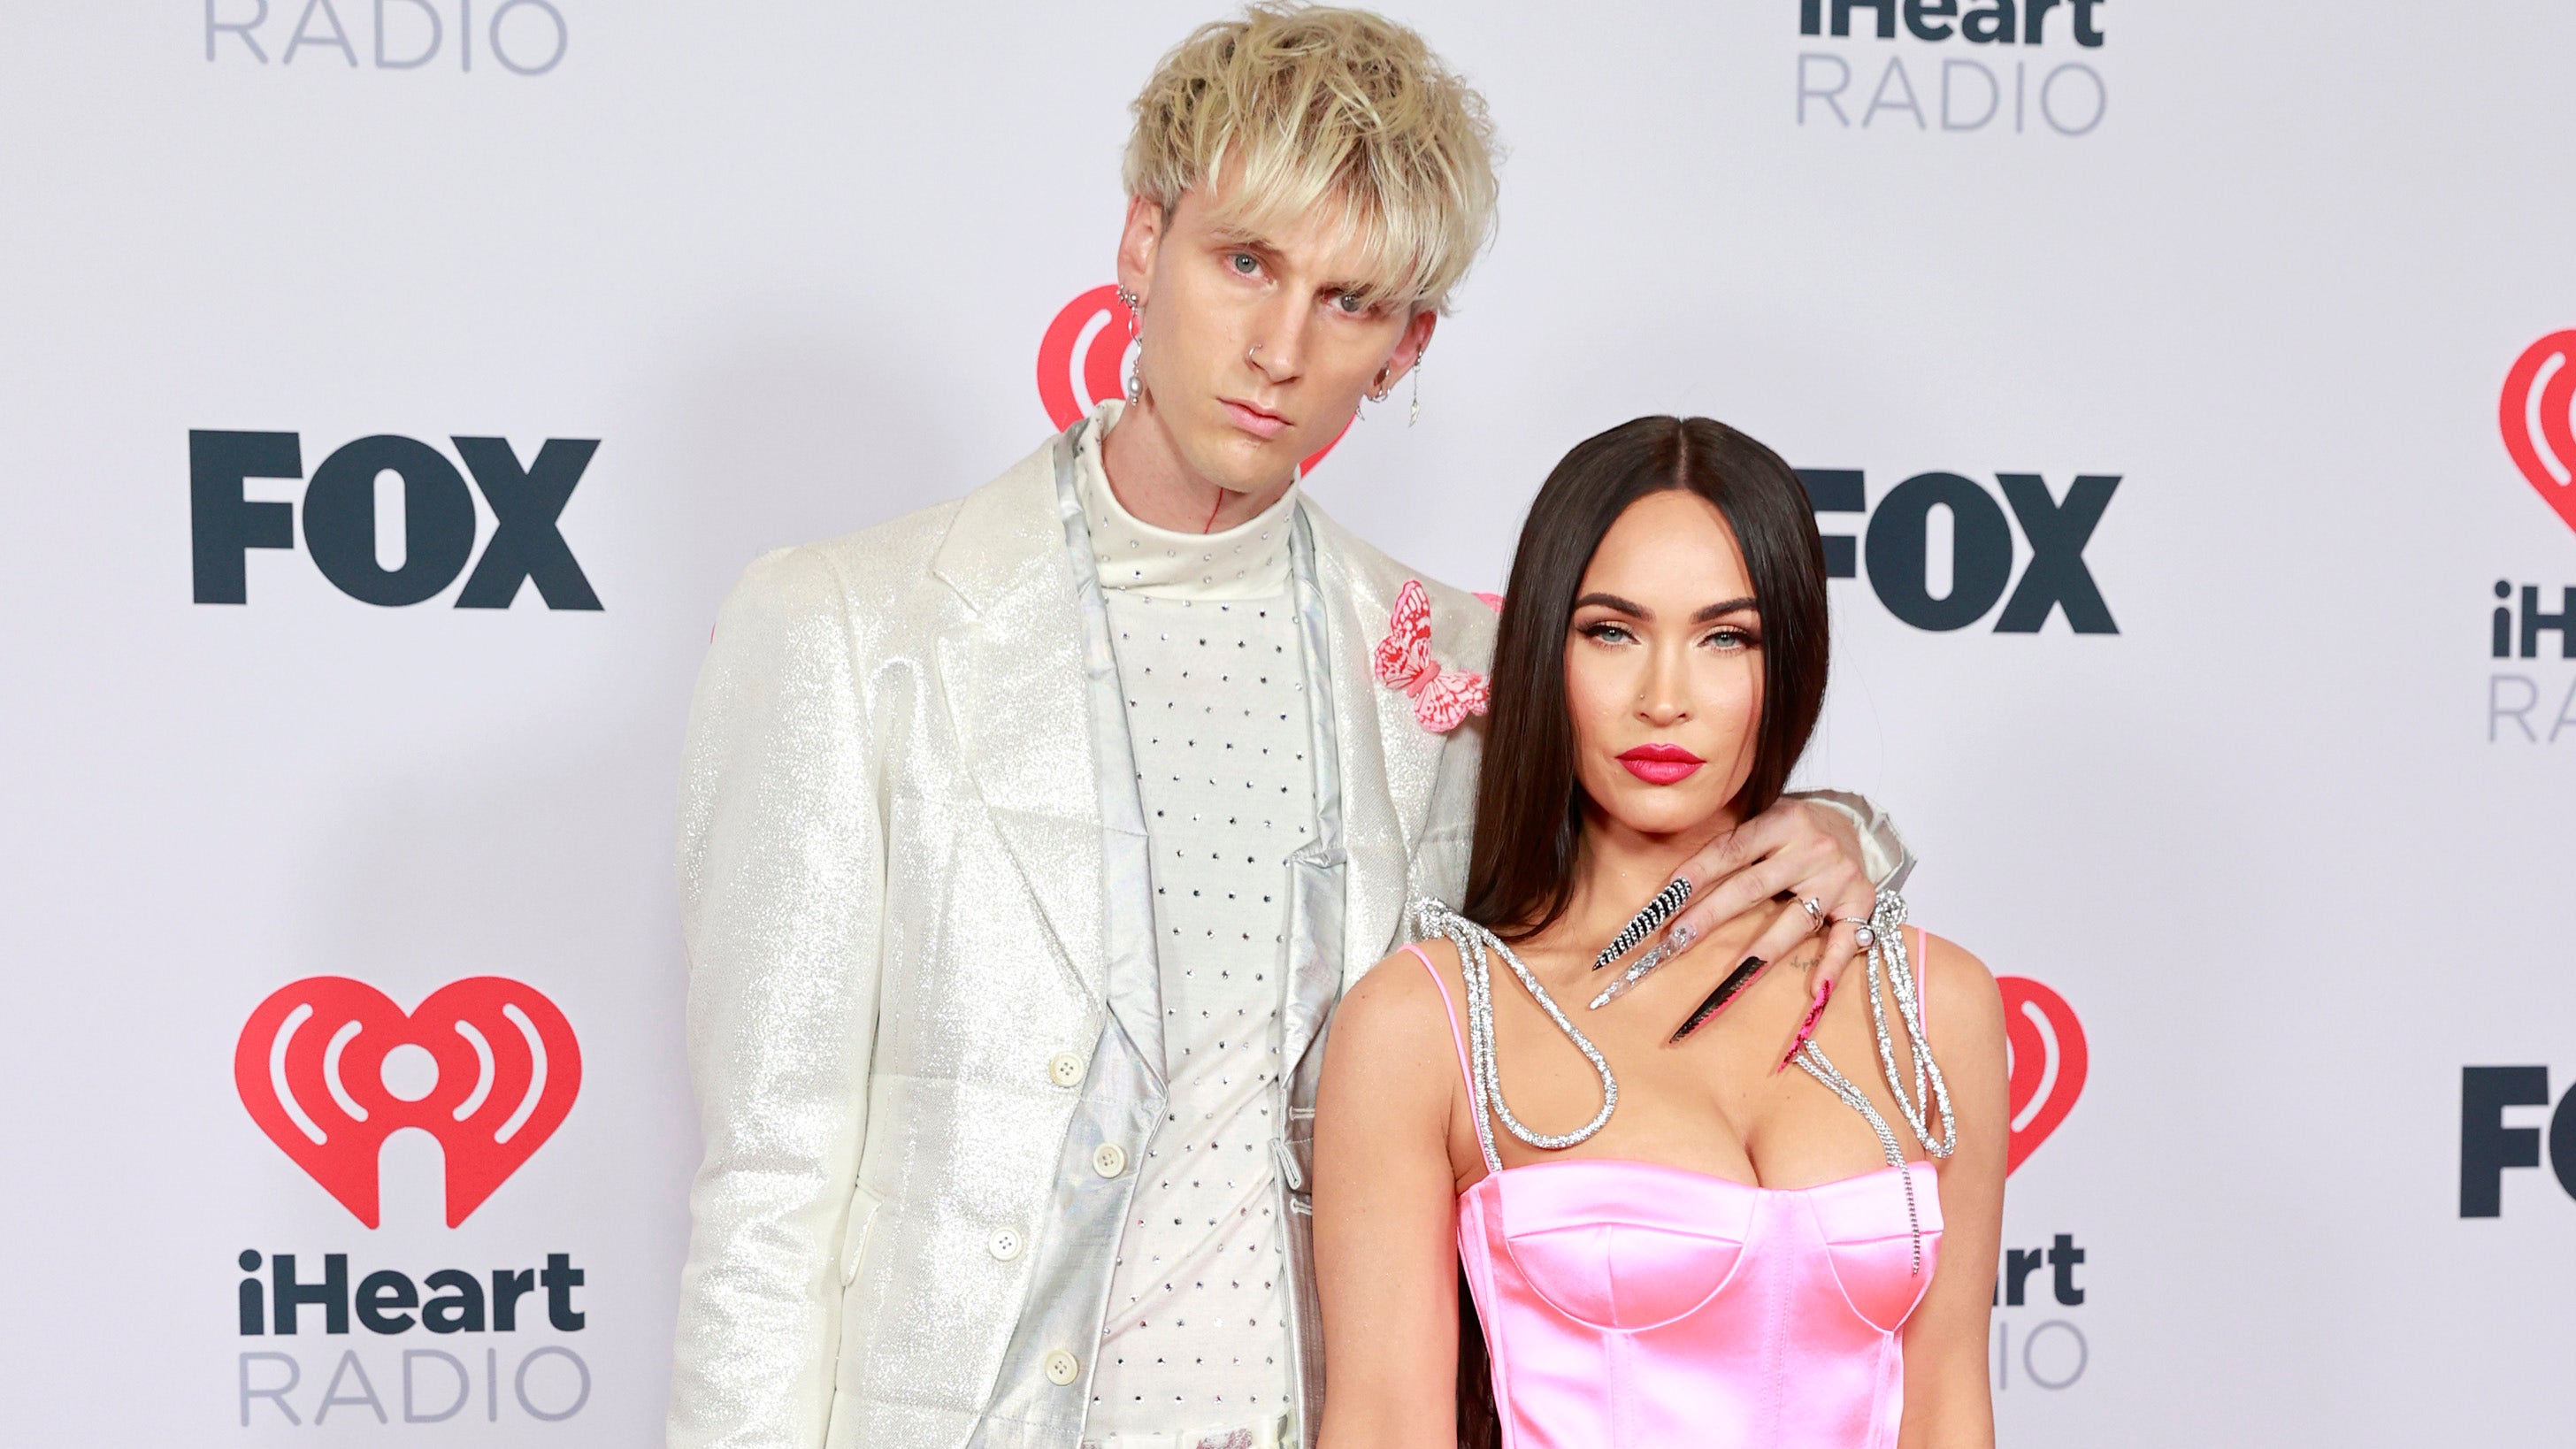 Megan Fox sizzles in all pink outfit on 2021 iHeartRadio Music Awards red carpet